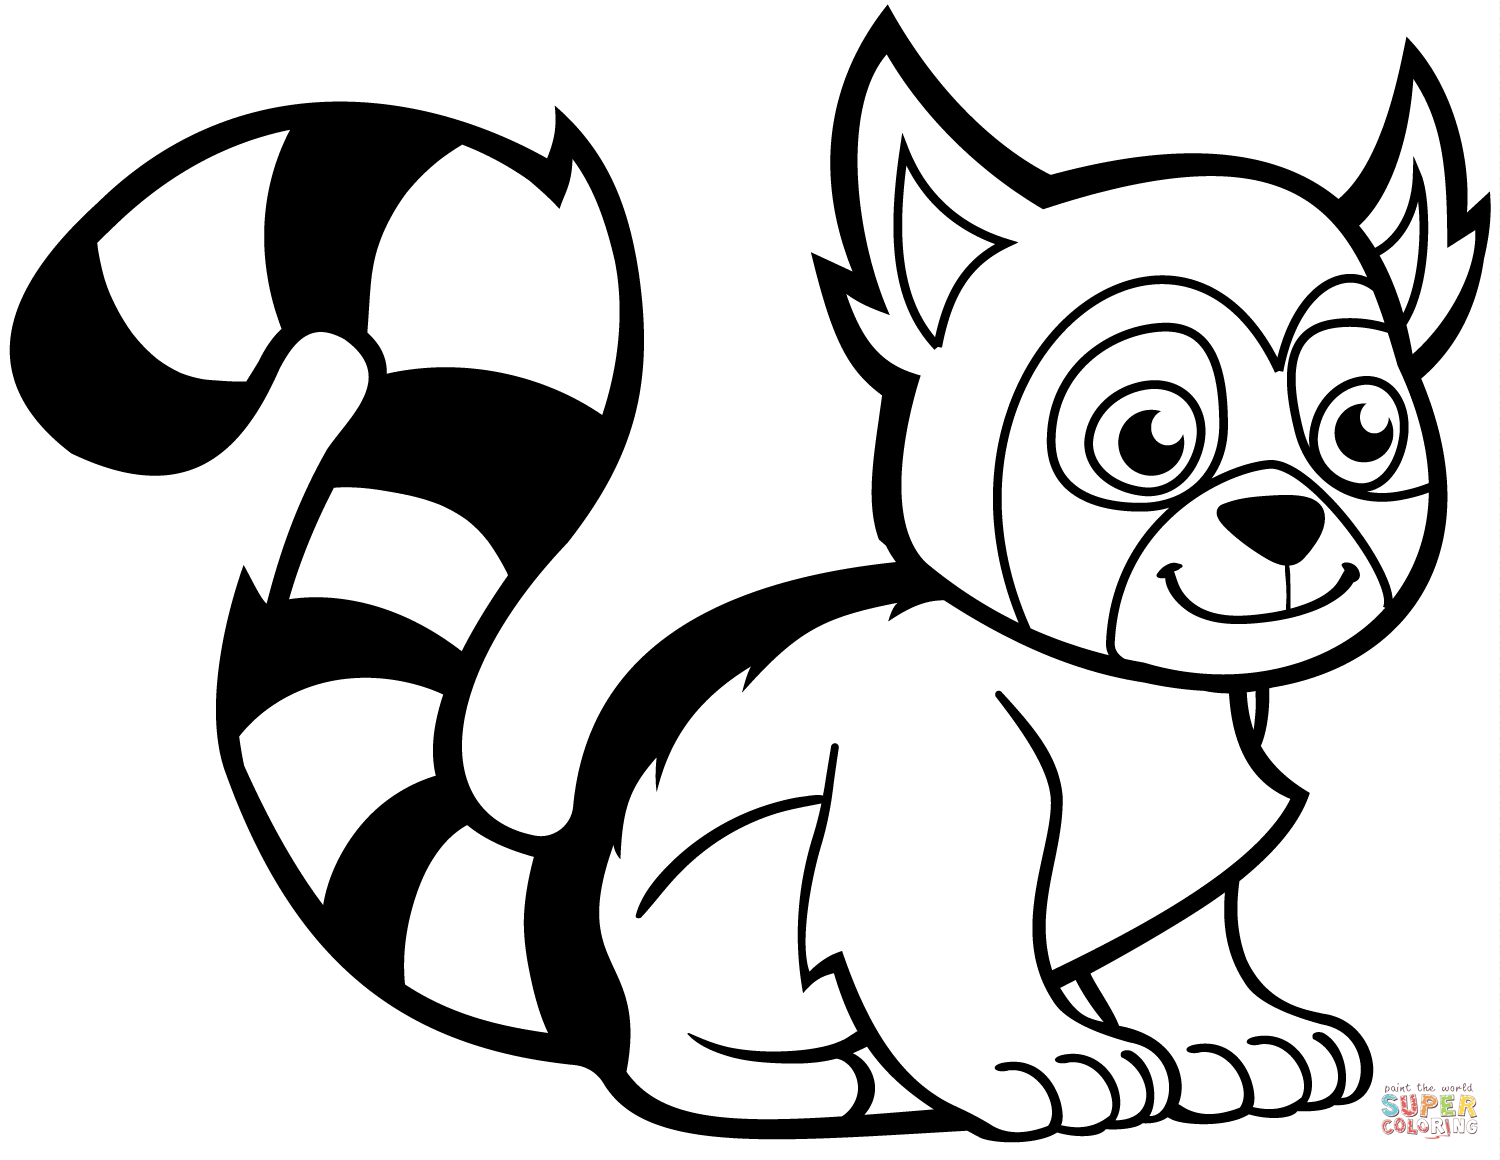 Funny lemur coloring page free printable coloring pages